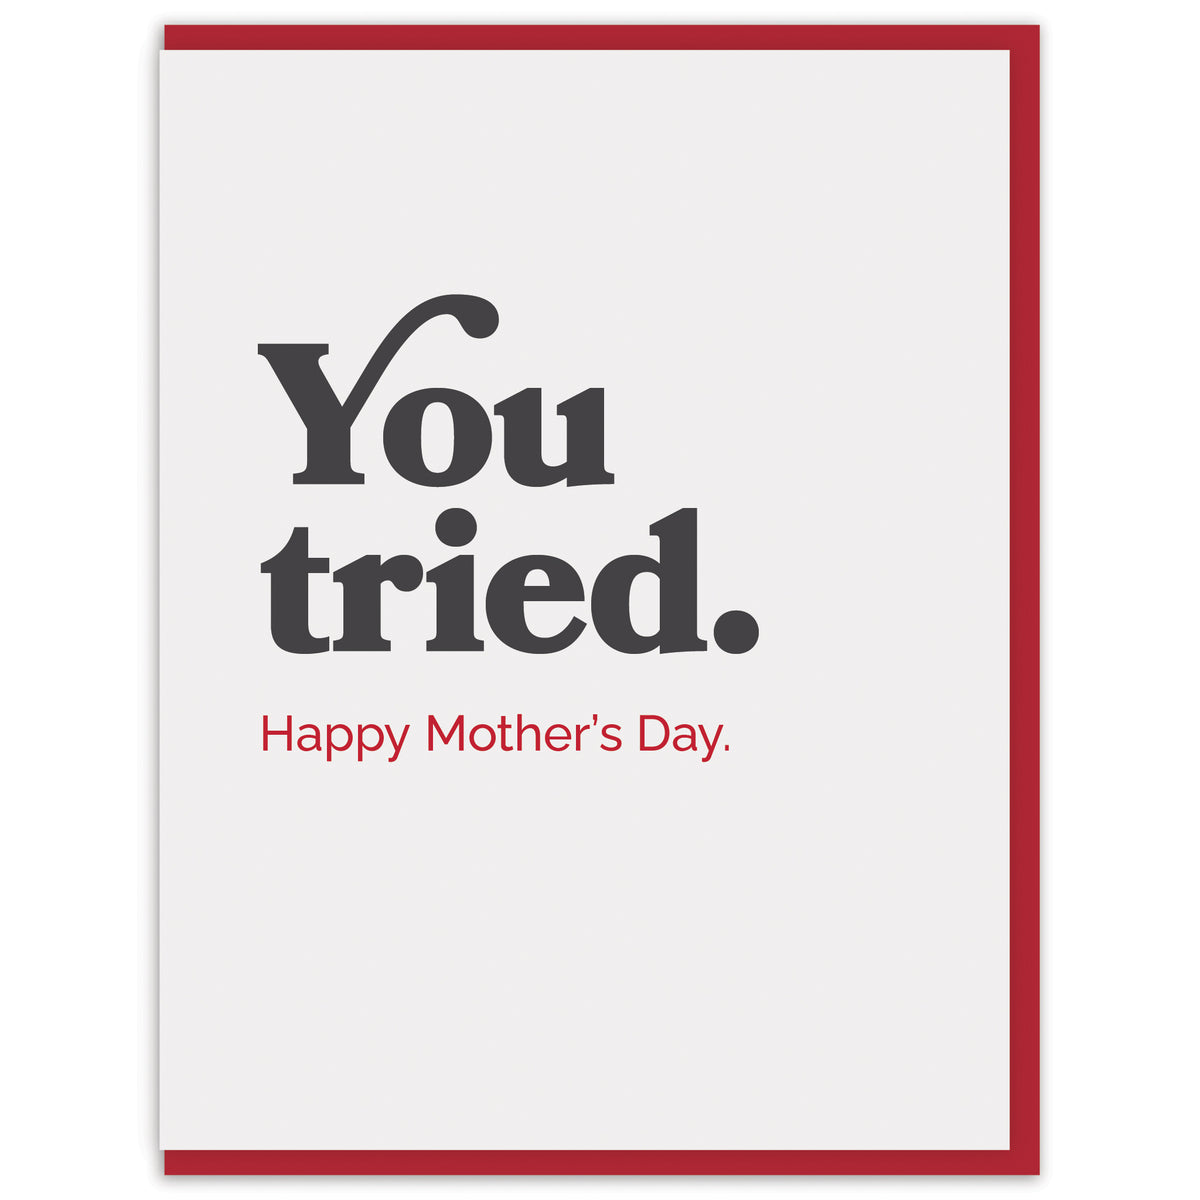 You tried. Happy Mother&#39;s Day.